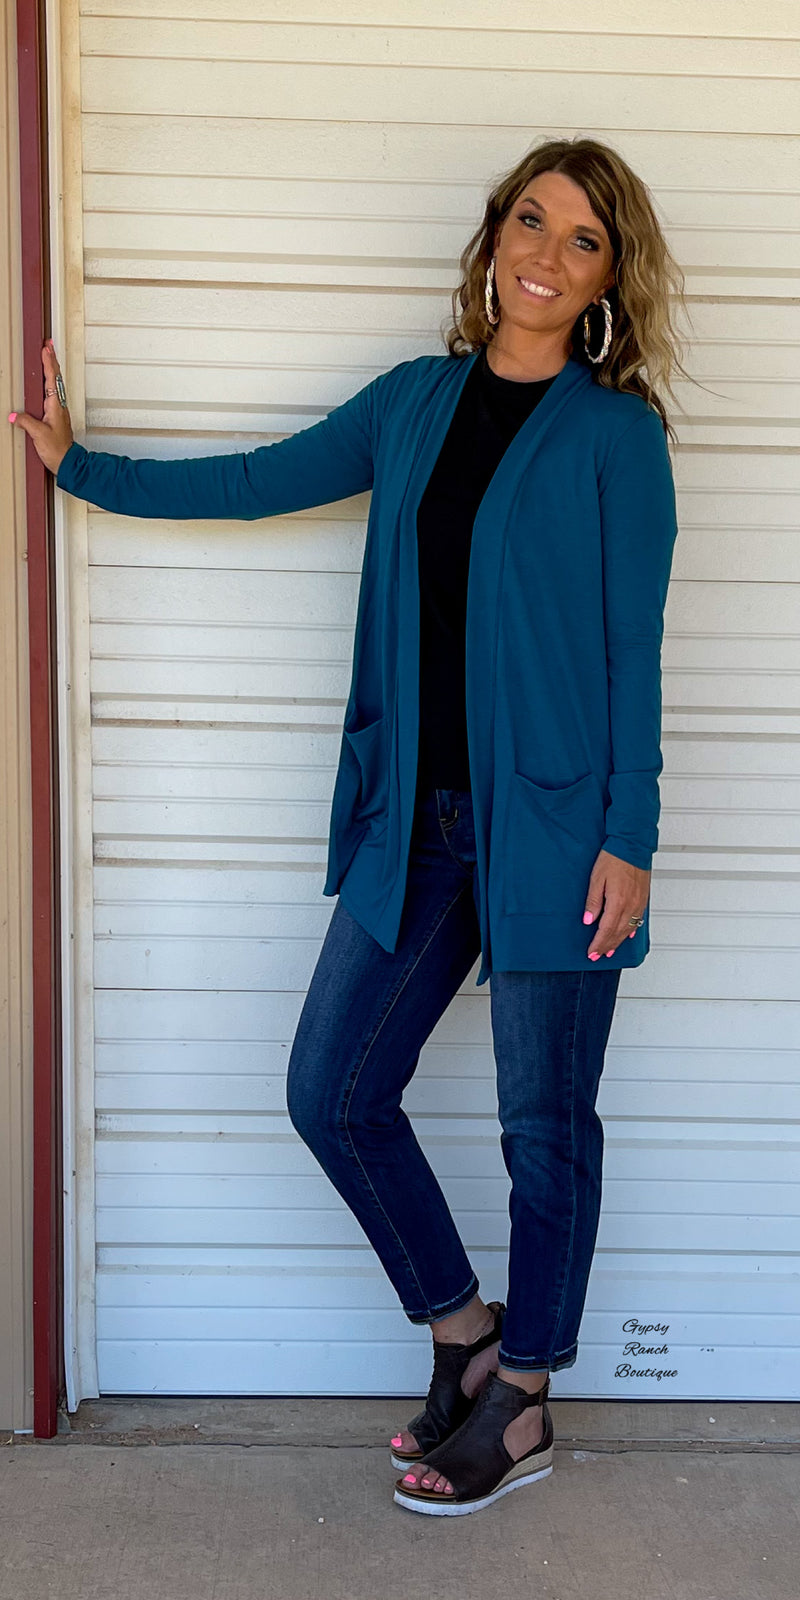 Teal Slouchy Pocket Cardigan - Also in Plus Size